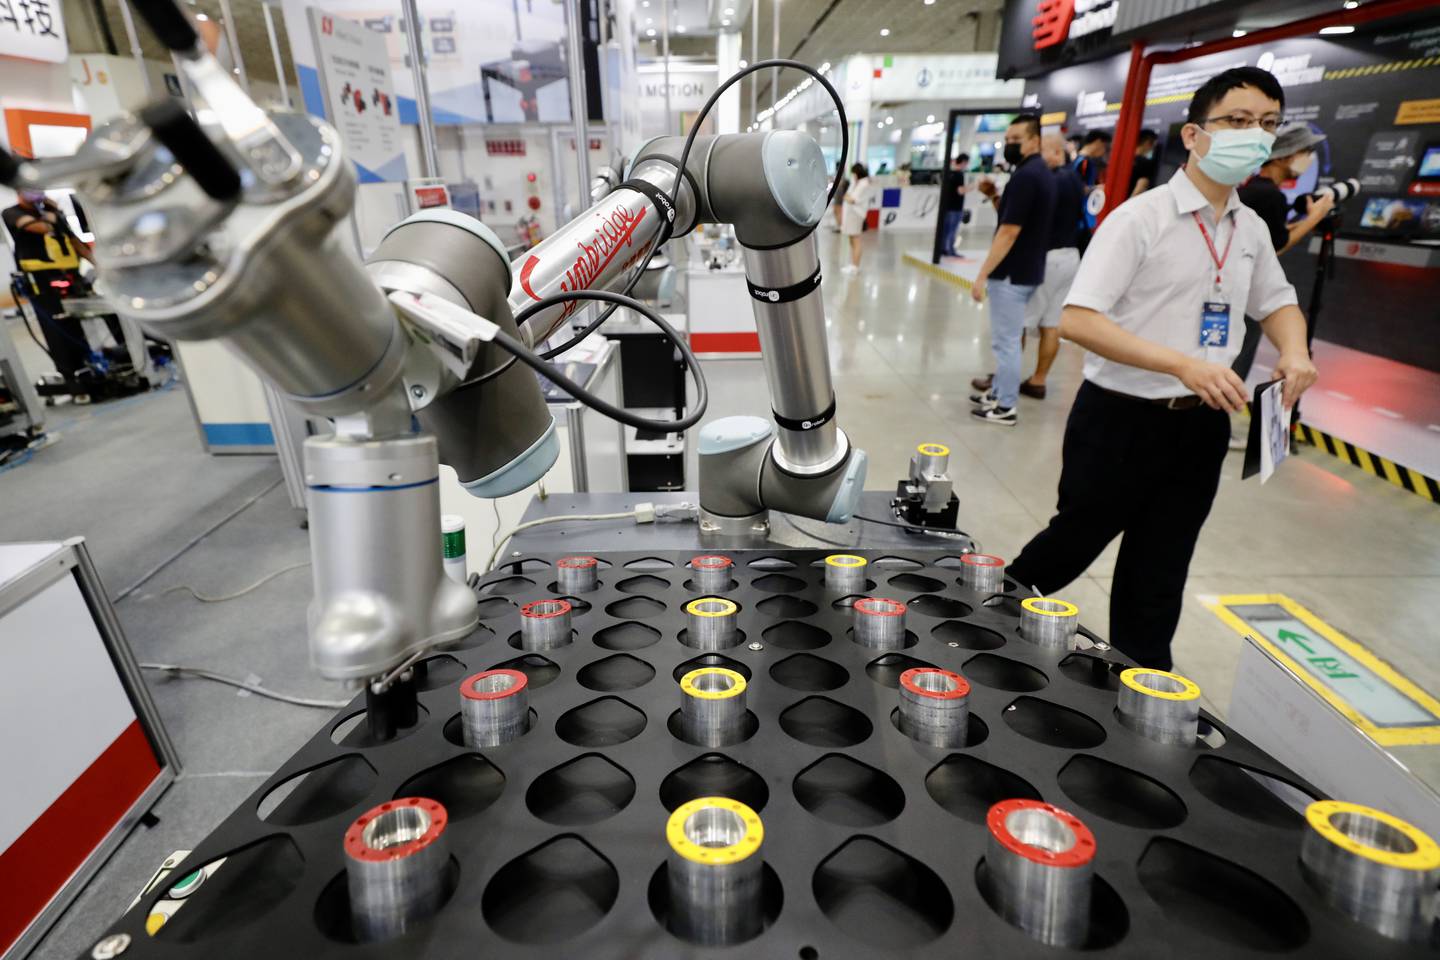 Robotic arms in action during the intelligent Asia show in Taipei. EPA